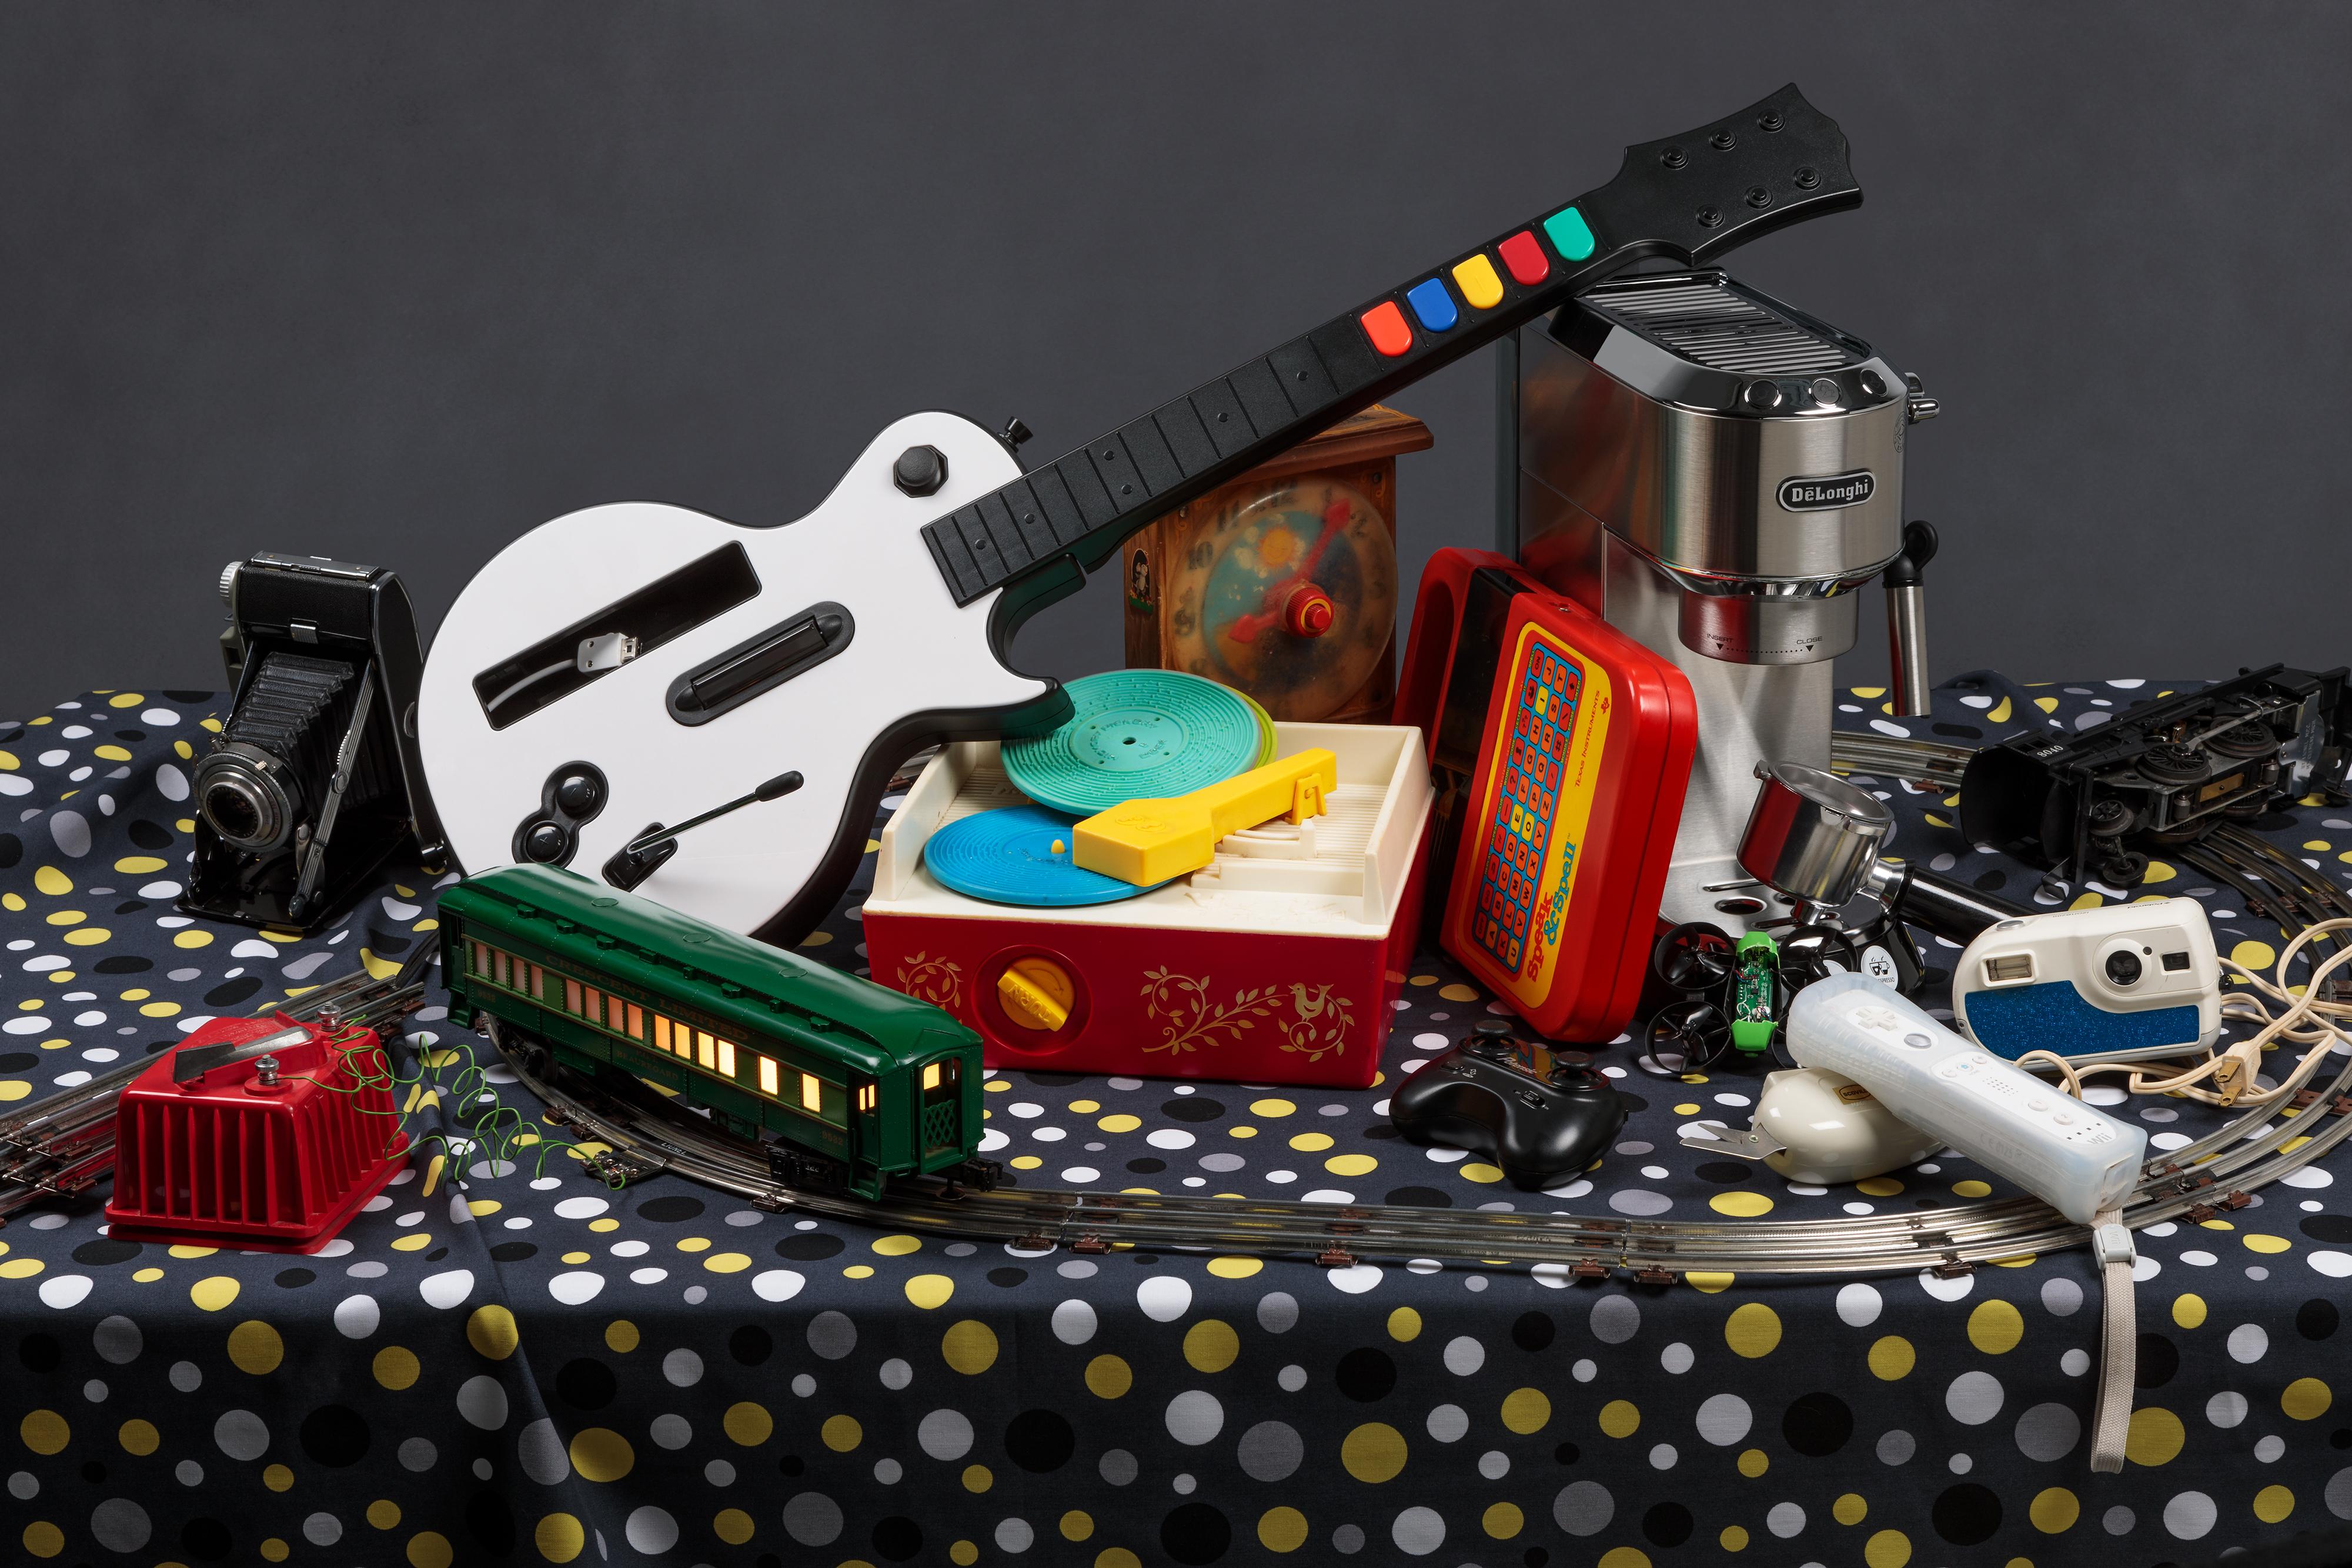 Jeanette May Still-Life Photograph - "Tech Vanitas: Train Set" contemporary still-life photograph of vintage toys